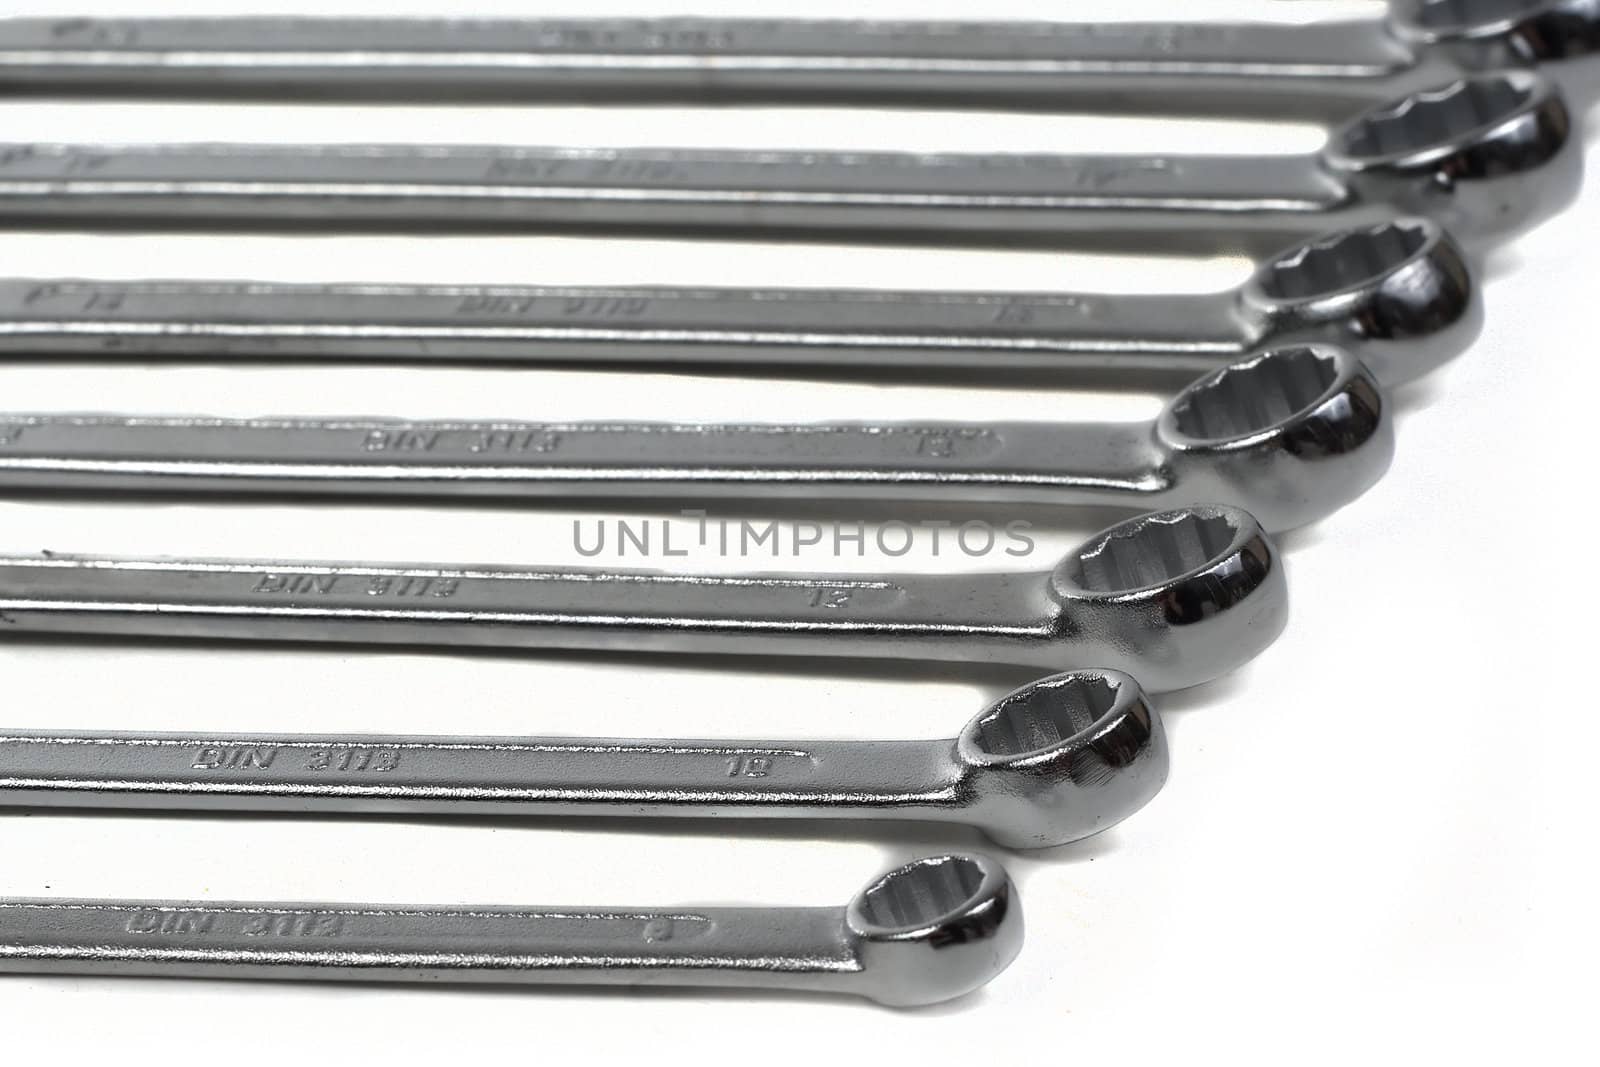 Set of steel wrenches, aligned, cropped view, emphasis and focus on the closer wrenches